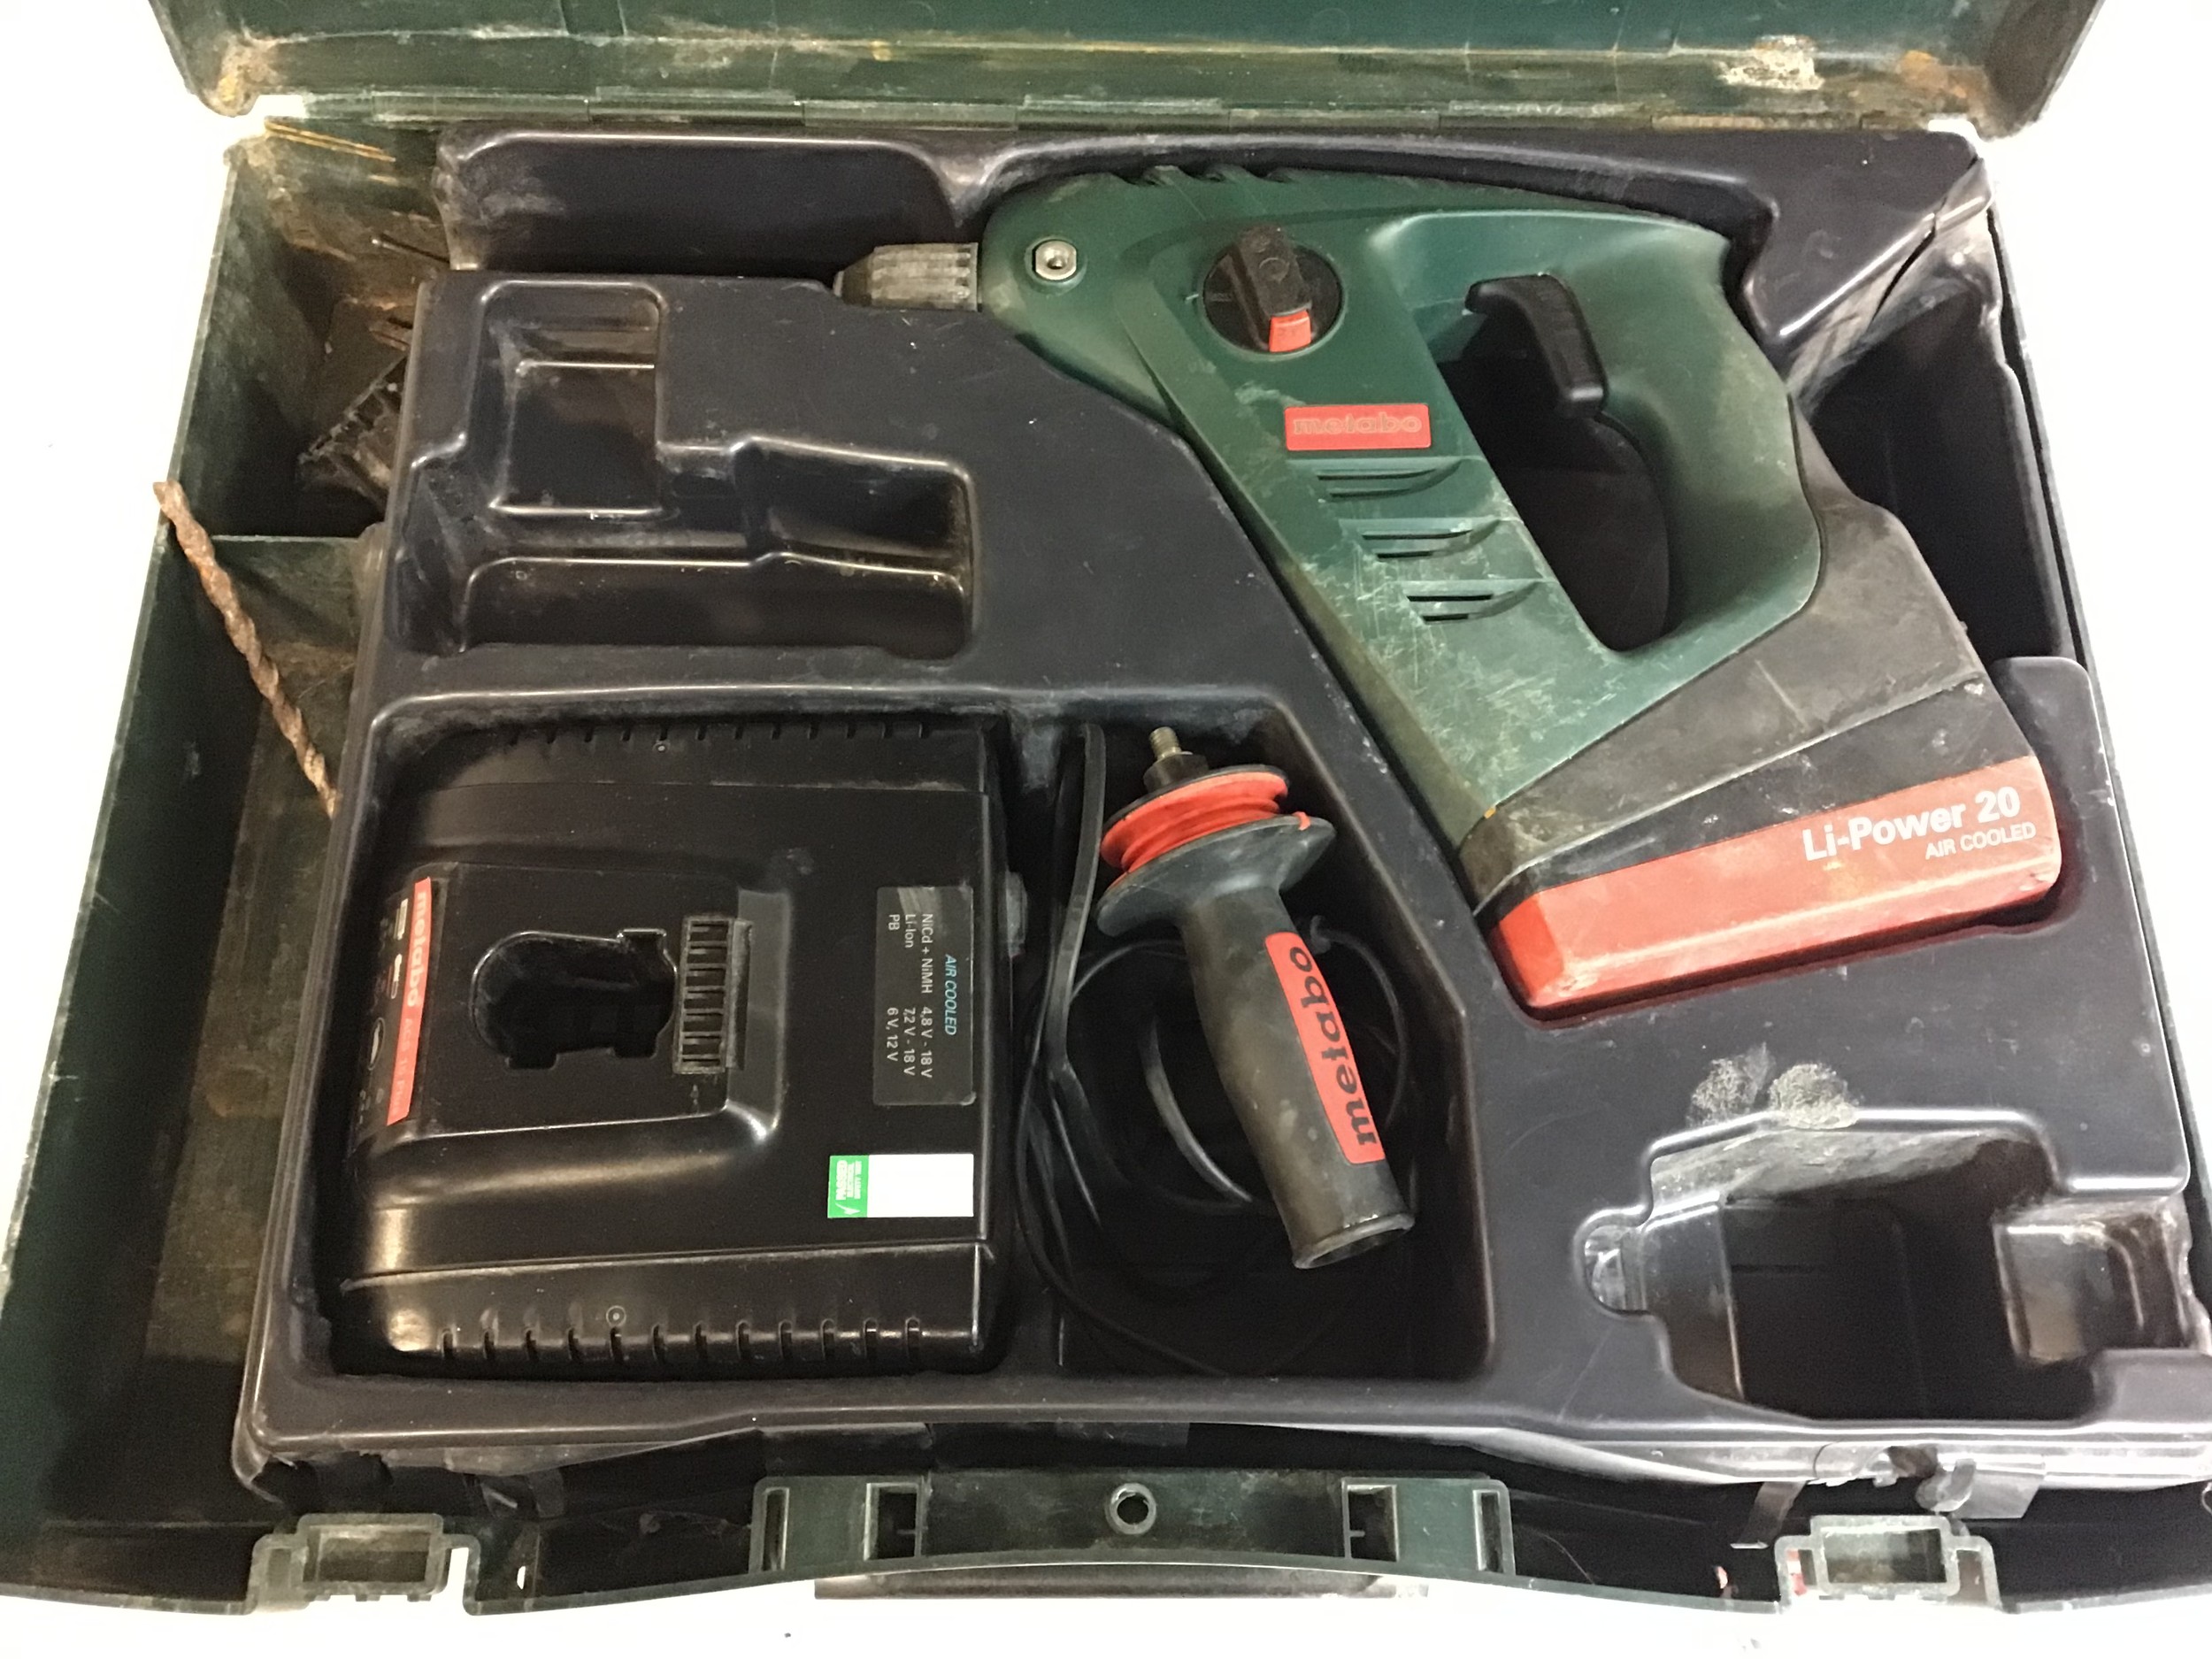 Metabo hammer Drill in box model - BHA18 complete with charger and battery.